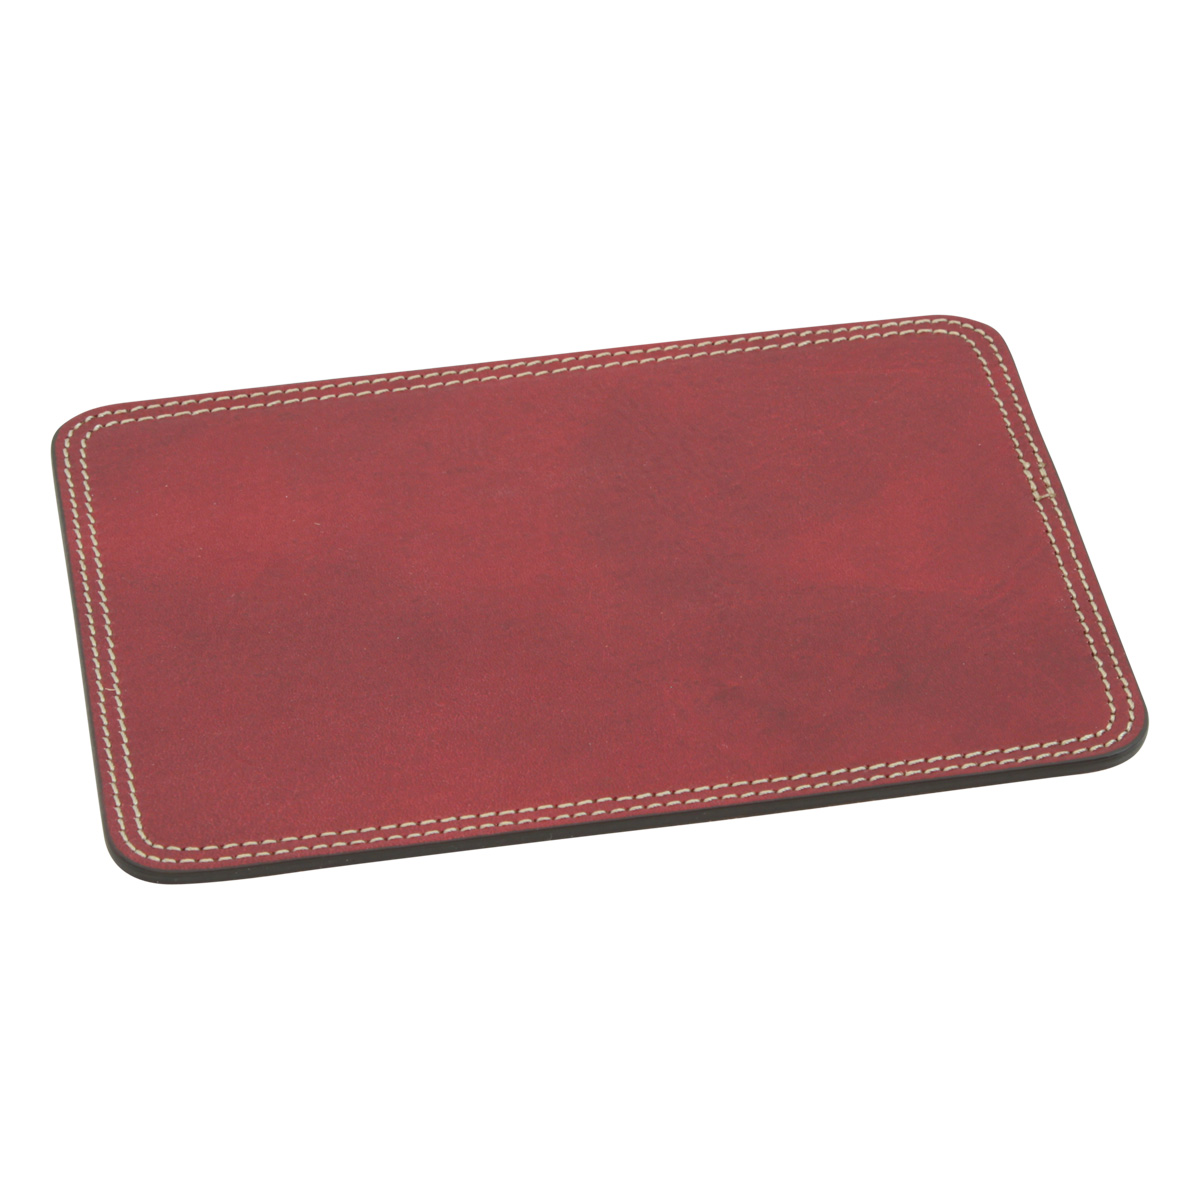 Leather mouse pad - red | 761089RO US | Old Angler Firenze